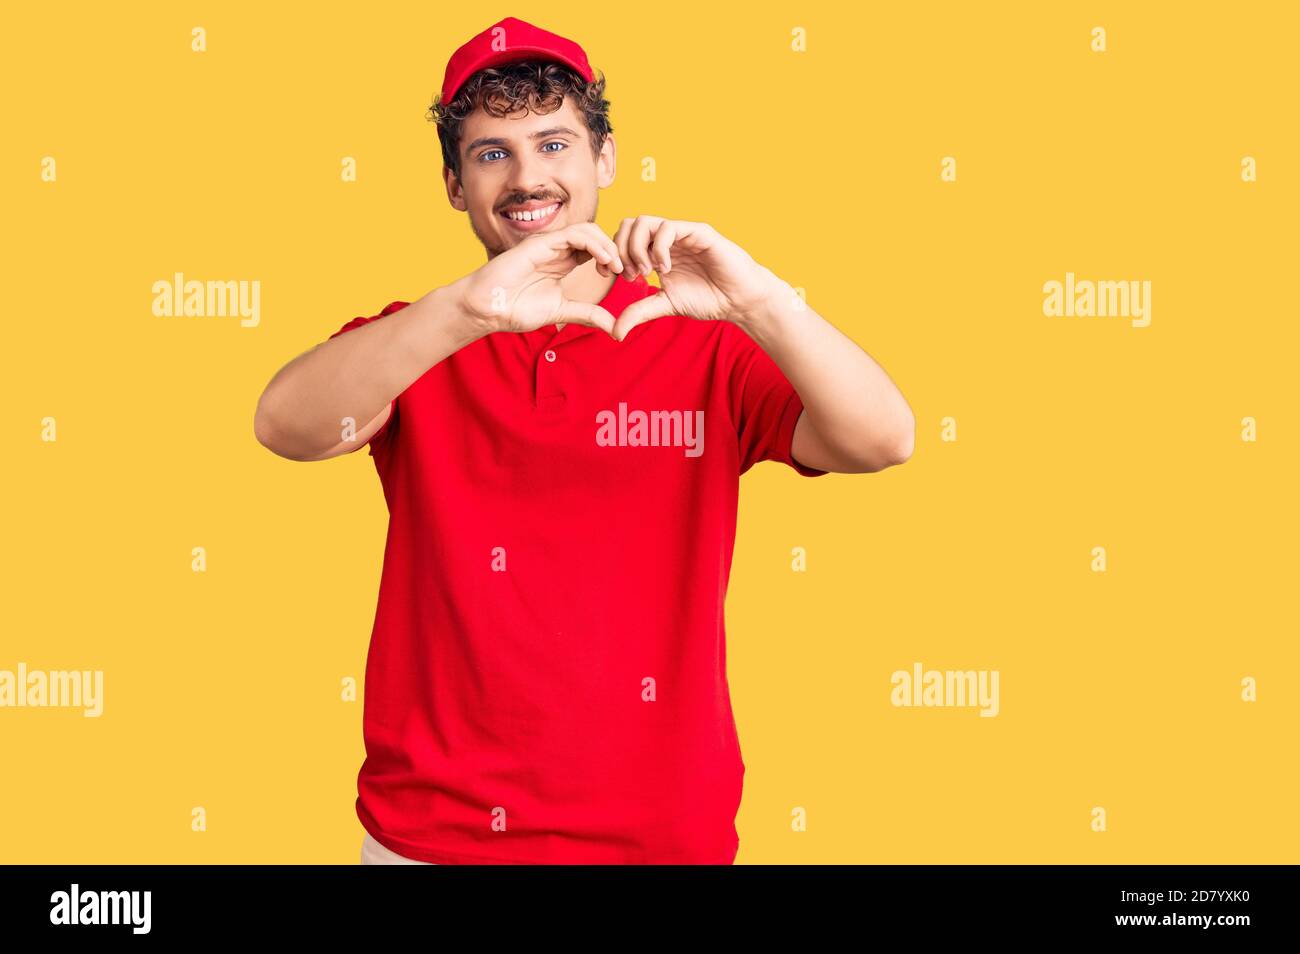 Young handsome man with curly hair wearing delivery uniform smiling in love showing heart symbol and shape with hands. romantic concept. Stock Photo